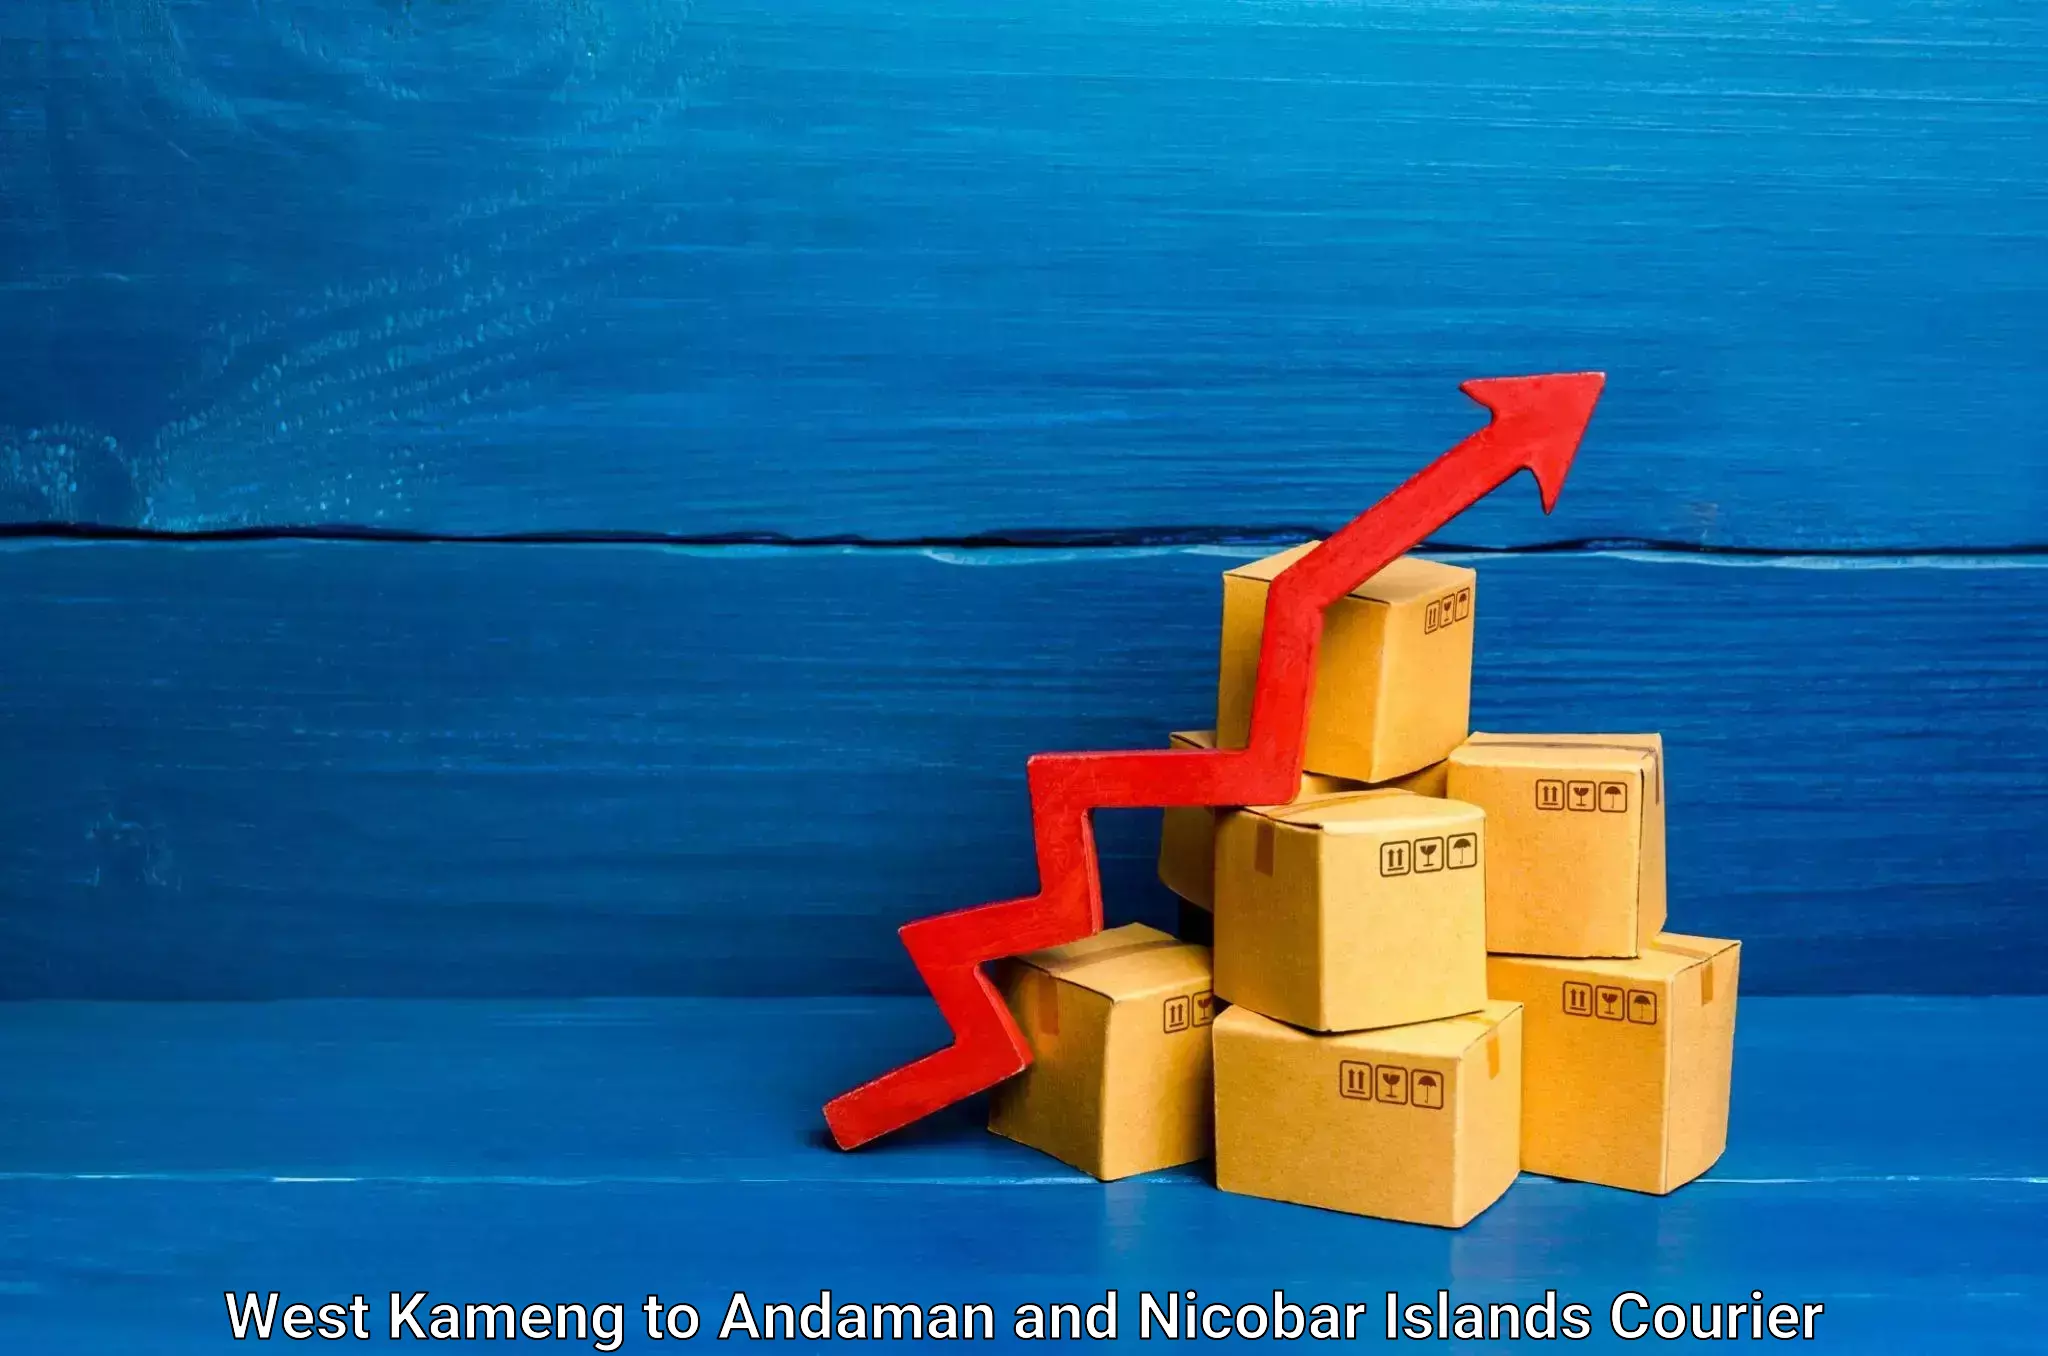 Courier service comparison West Kameng to Andaman and Nicobar Islands